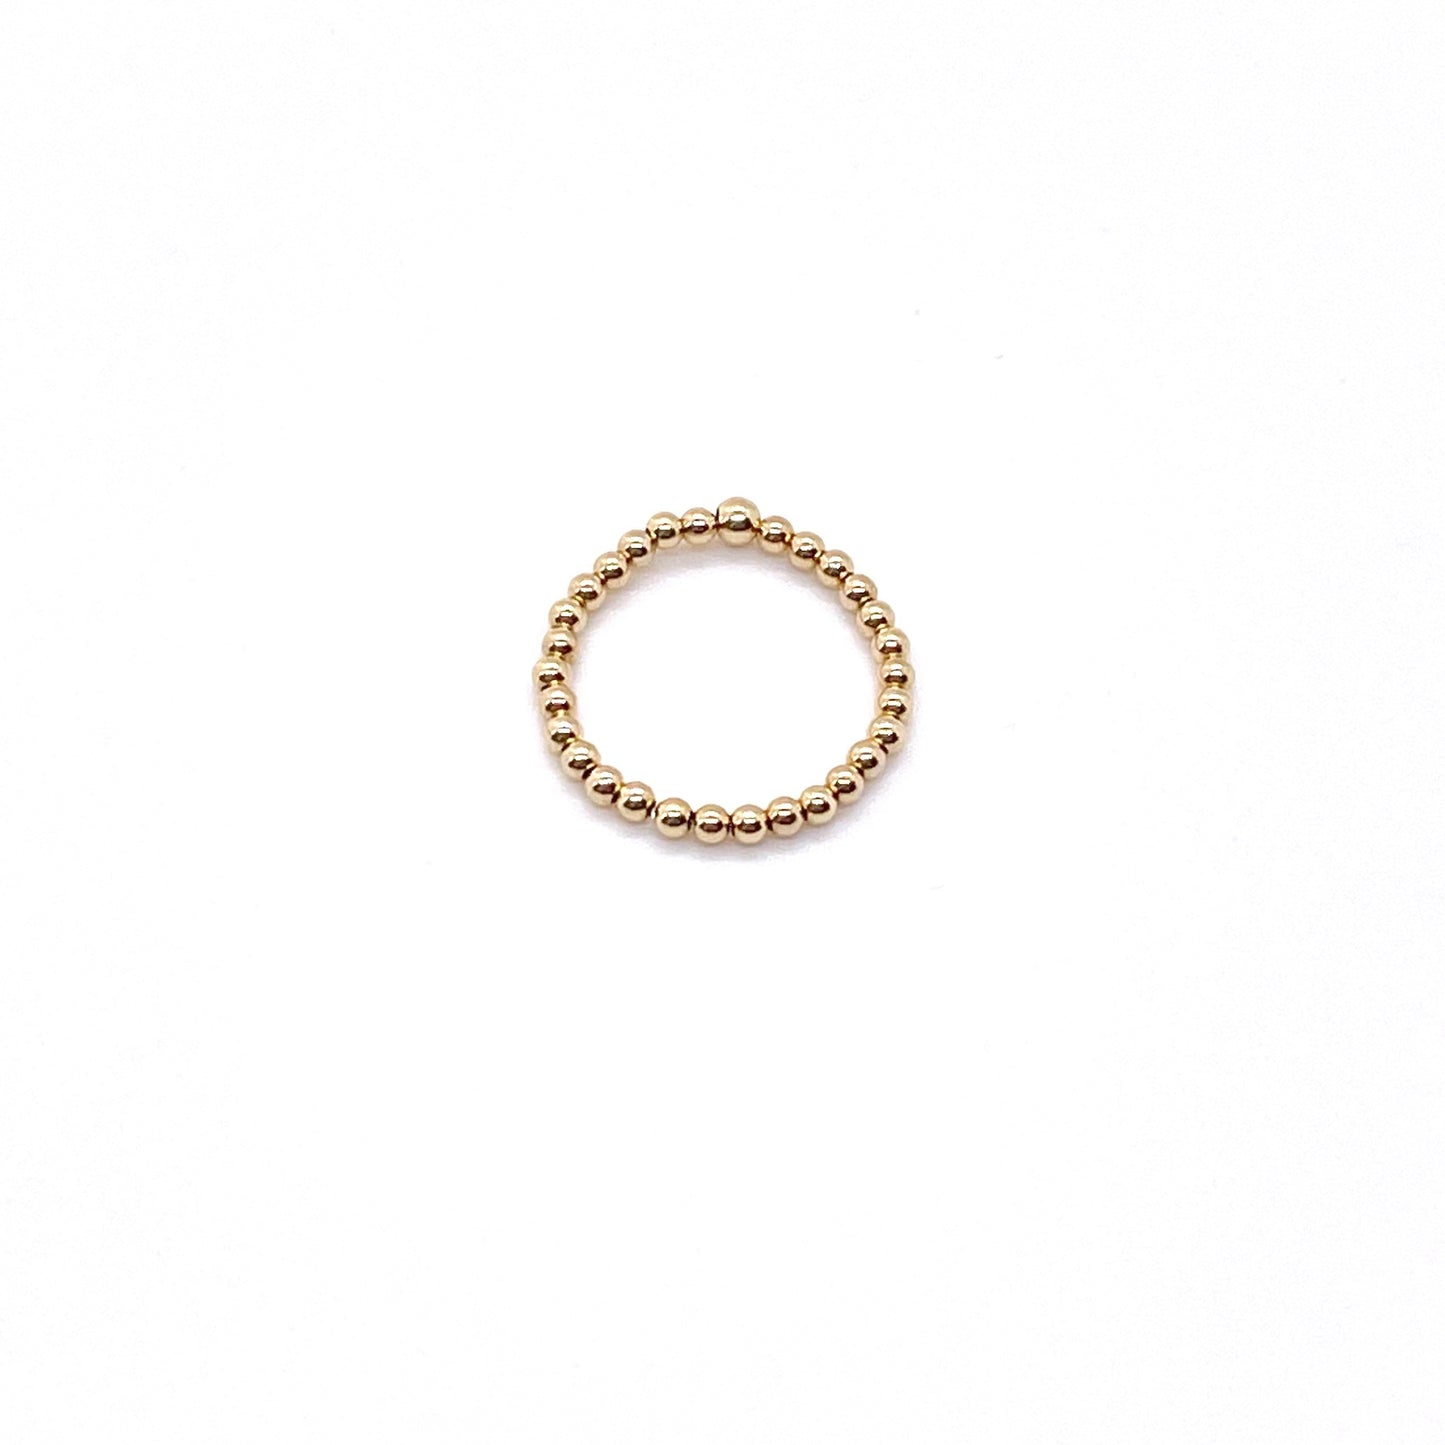 Ball ring with 14K gold filled 2mm waterproof beads on stretch cord.